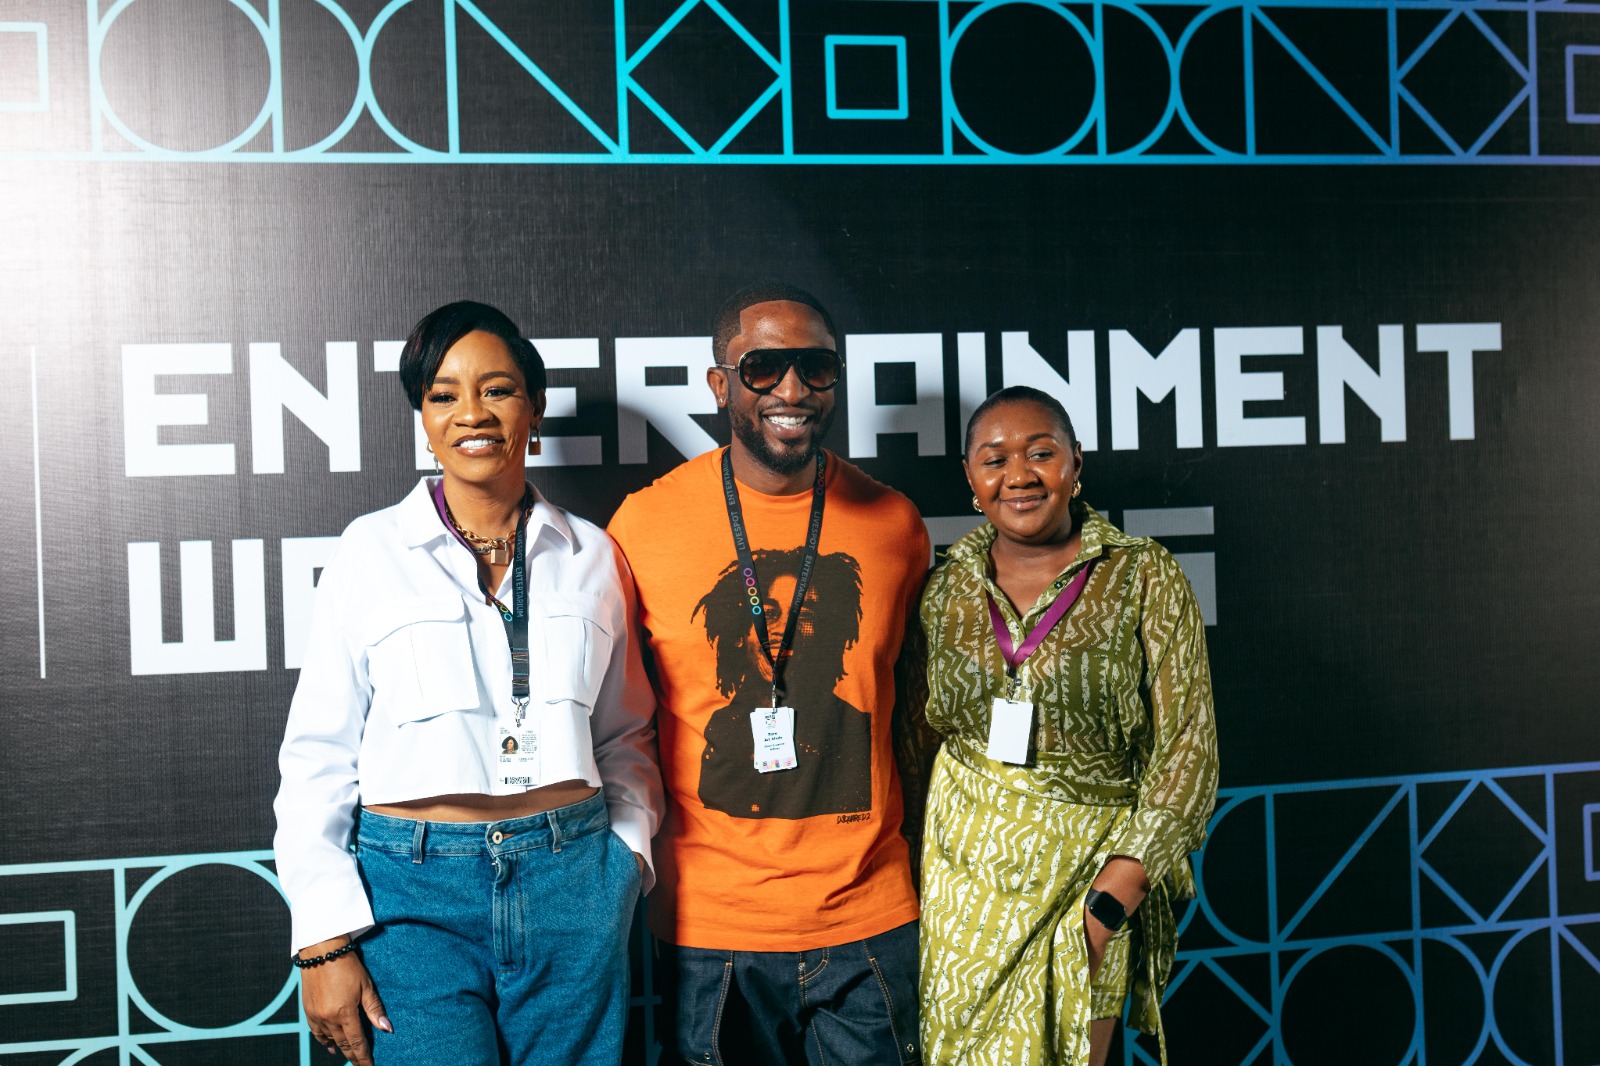 EWL to convene Africa's US$62.67m Entertainment Industry this December